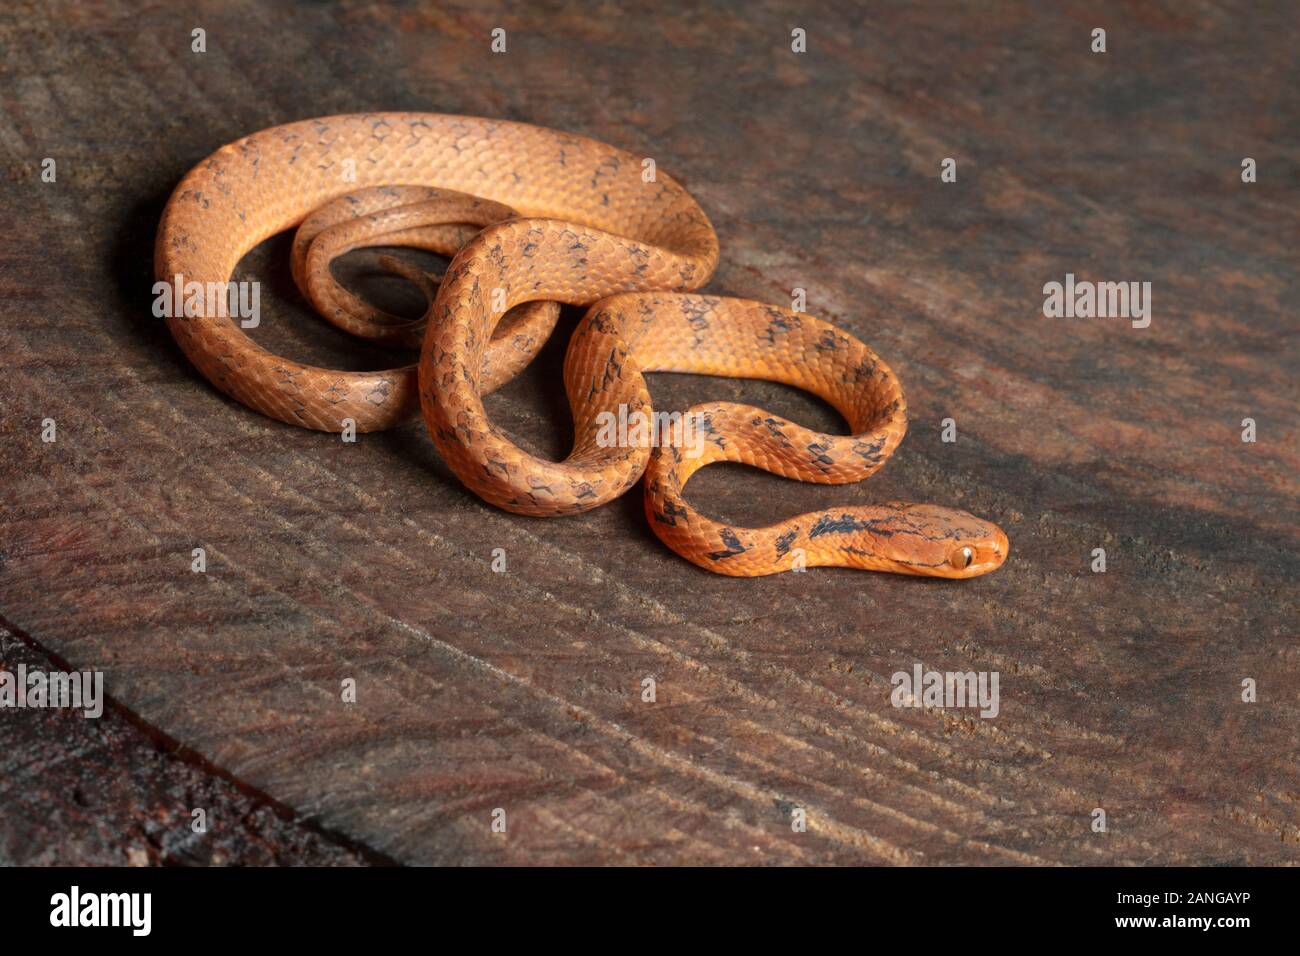 The common slug snake, Pareas monticola, is a species of snake found in Northeast India Stock Photo